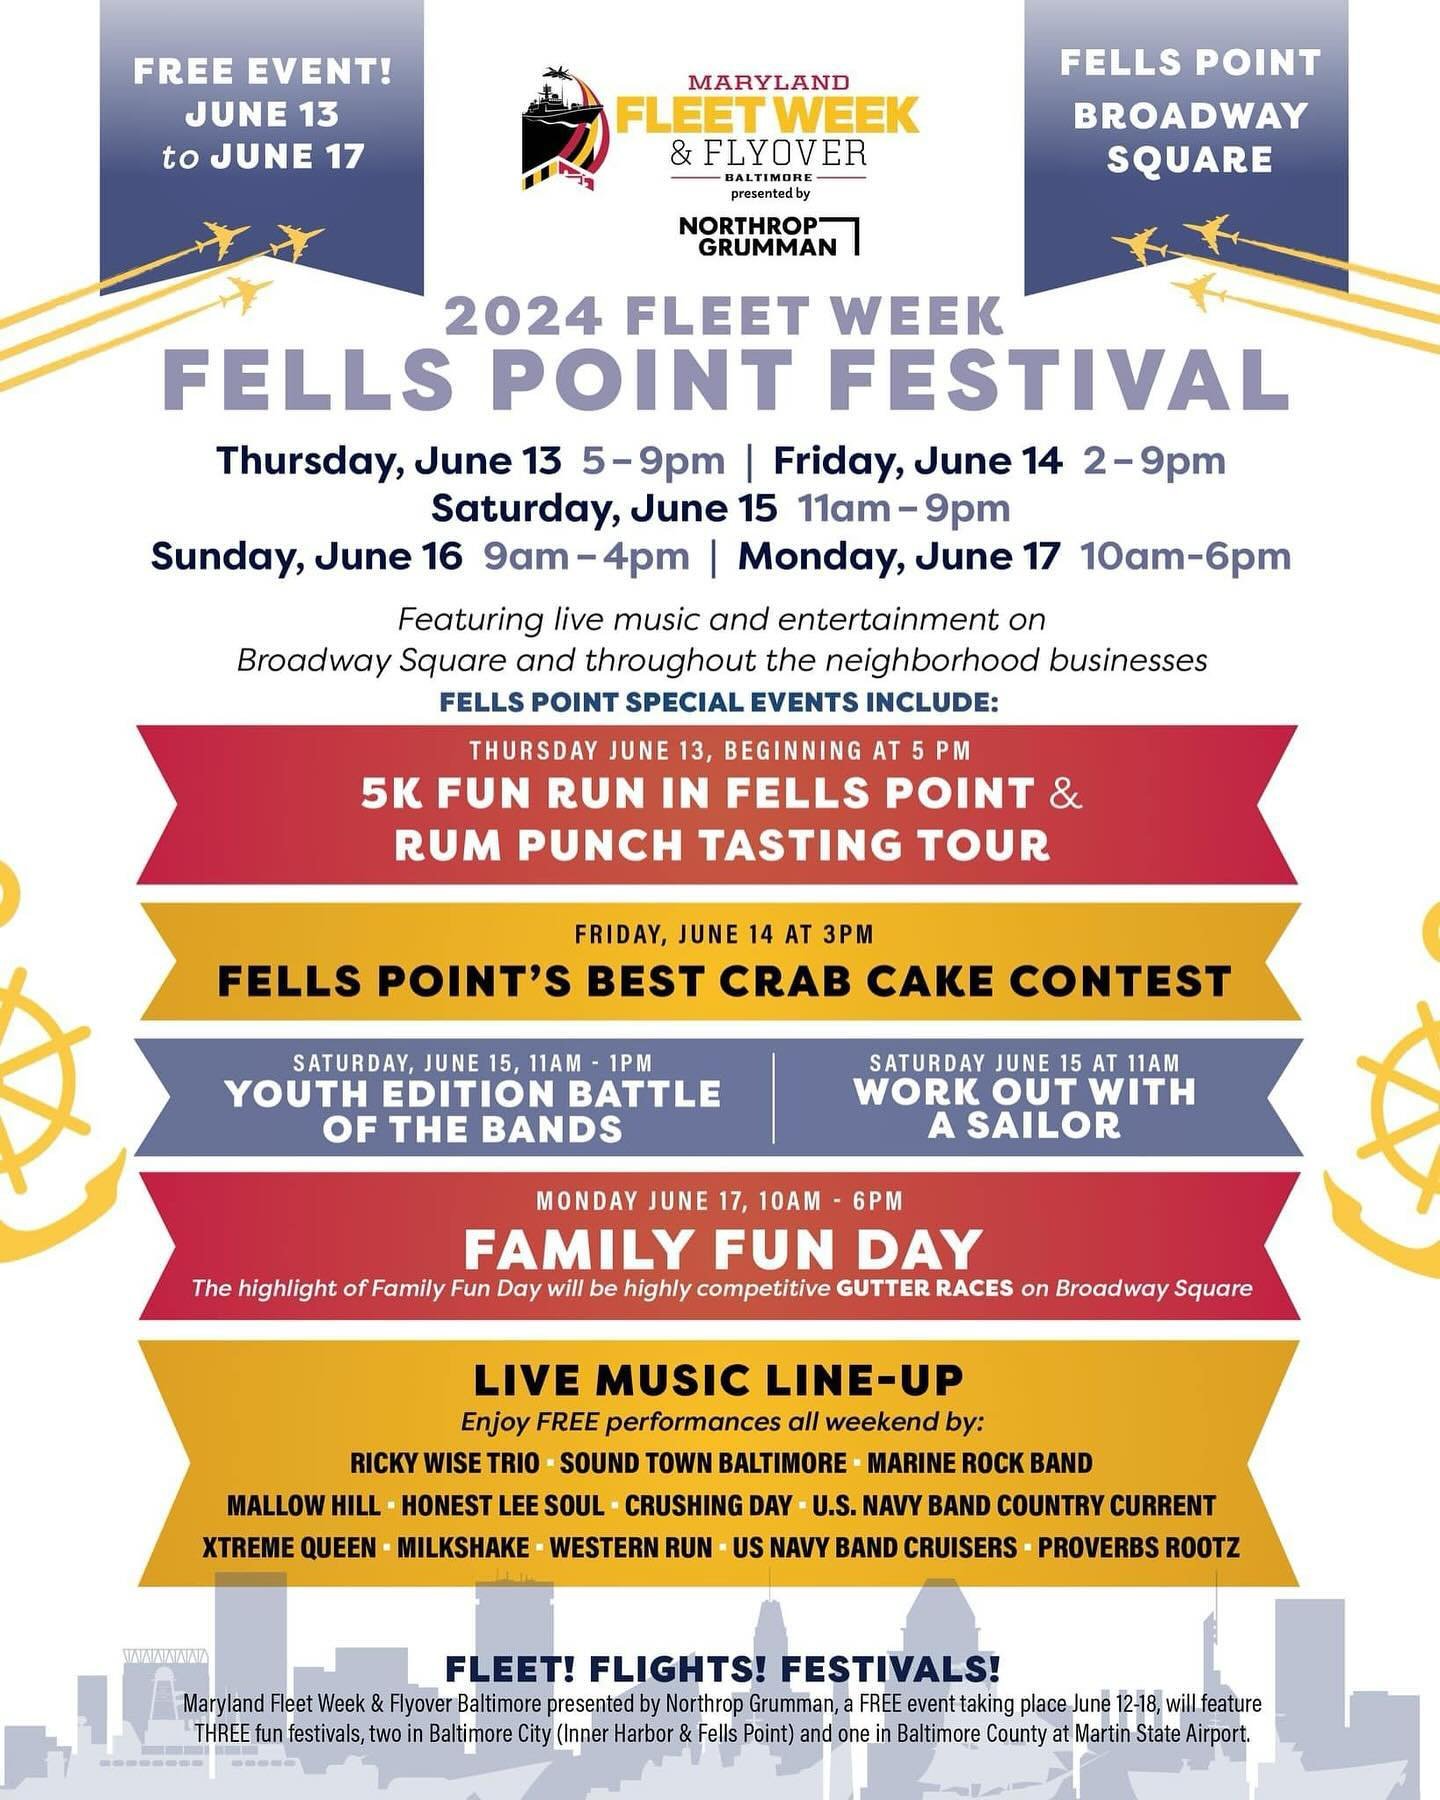 Save the Date for Fleet Week and all the festivities happening in Fell&rsquo;s Point!⚓️ #fellspointmainstreet #fellspoint #fleetweek #mdfleetweek